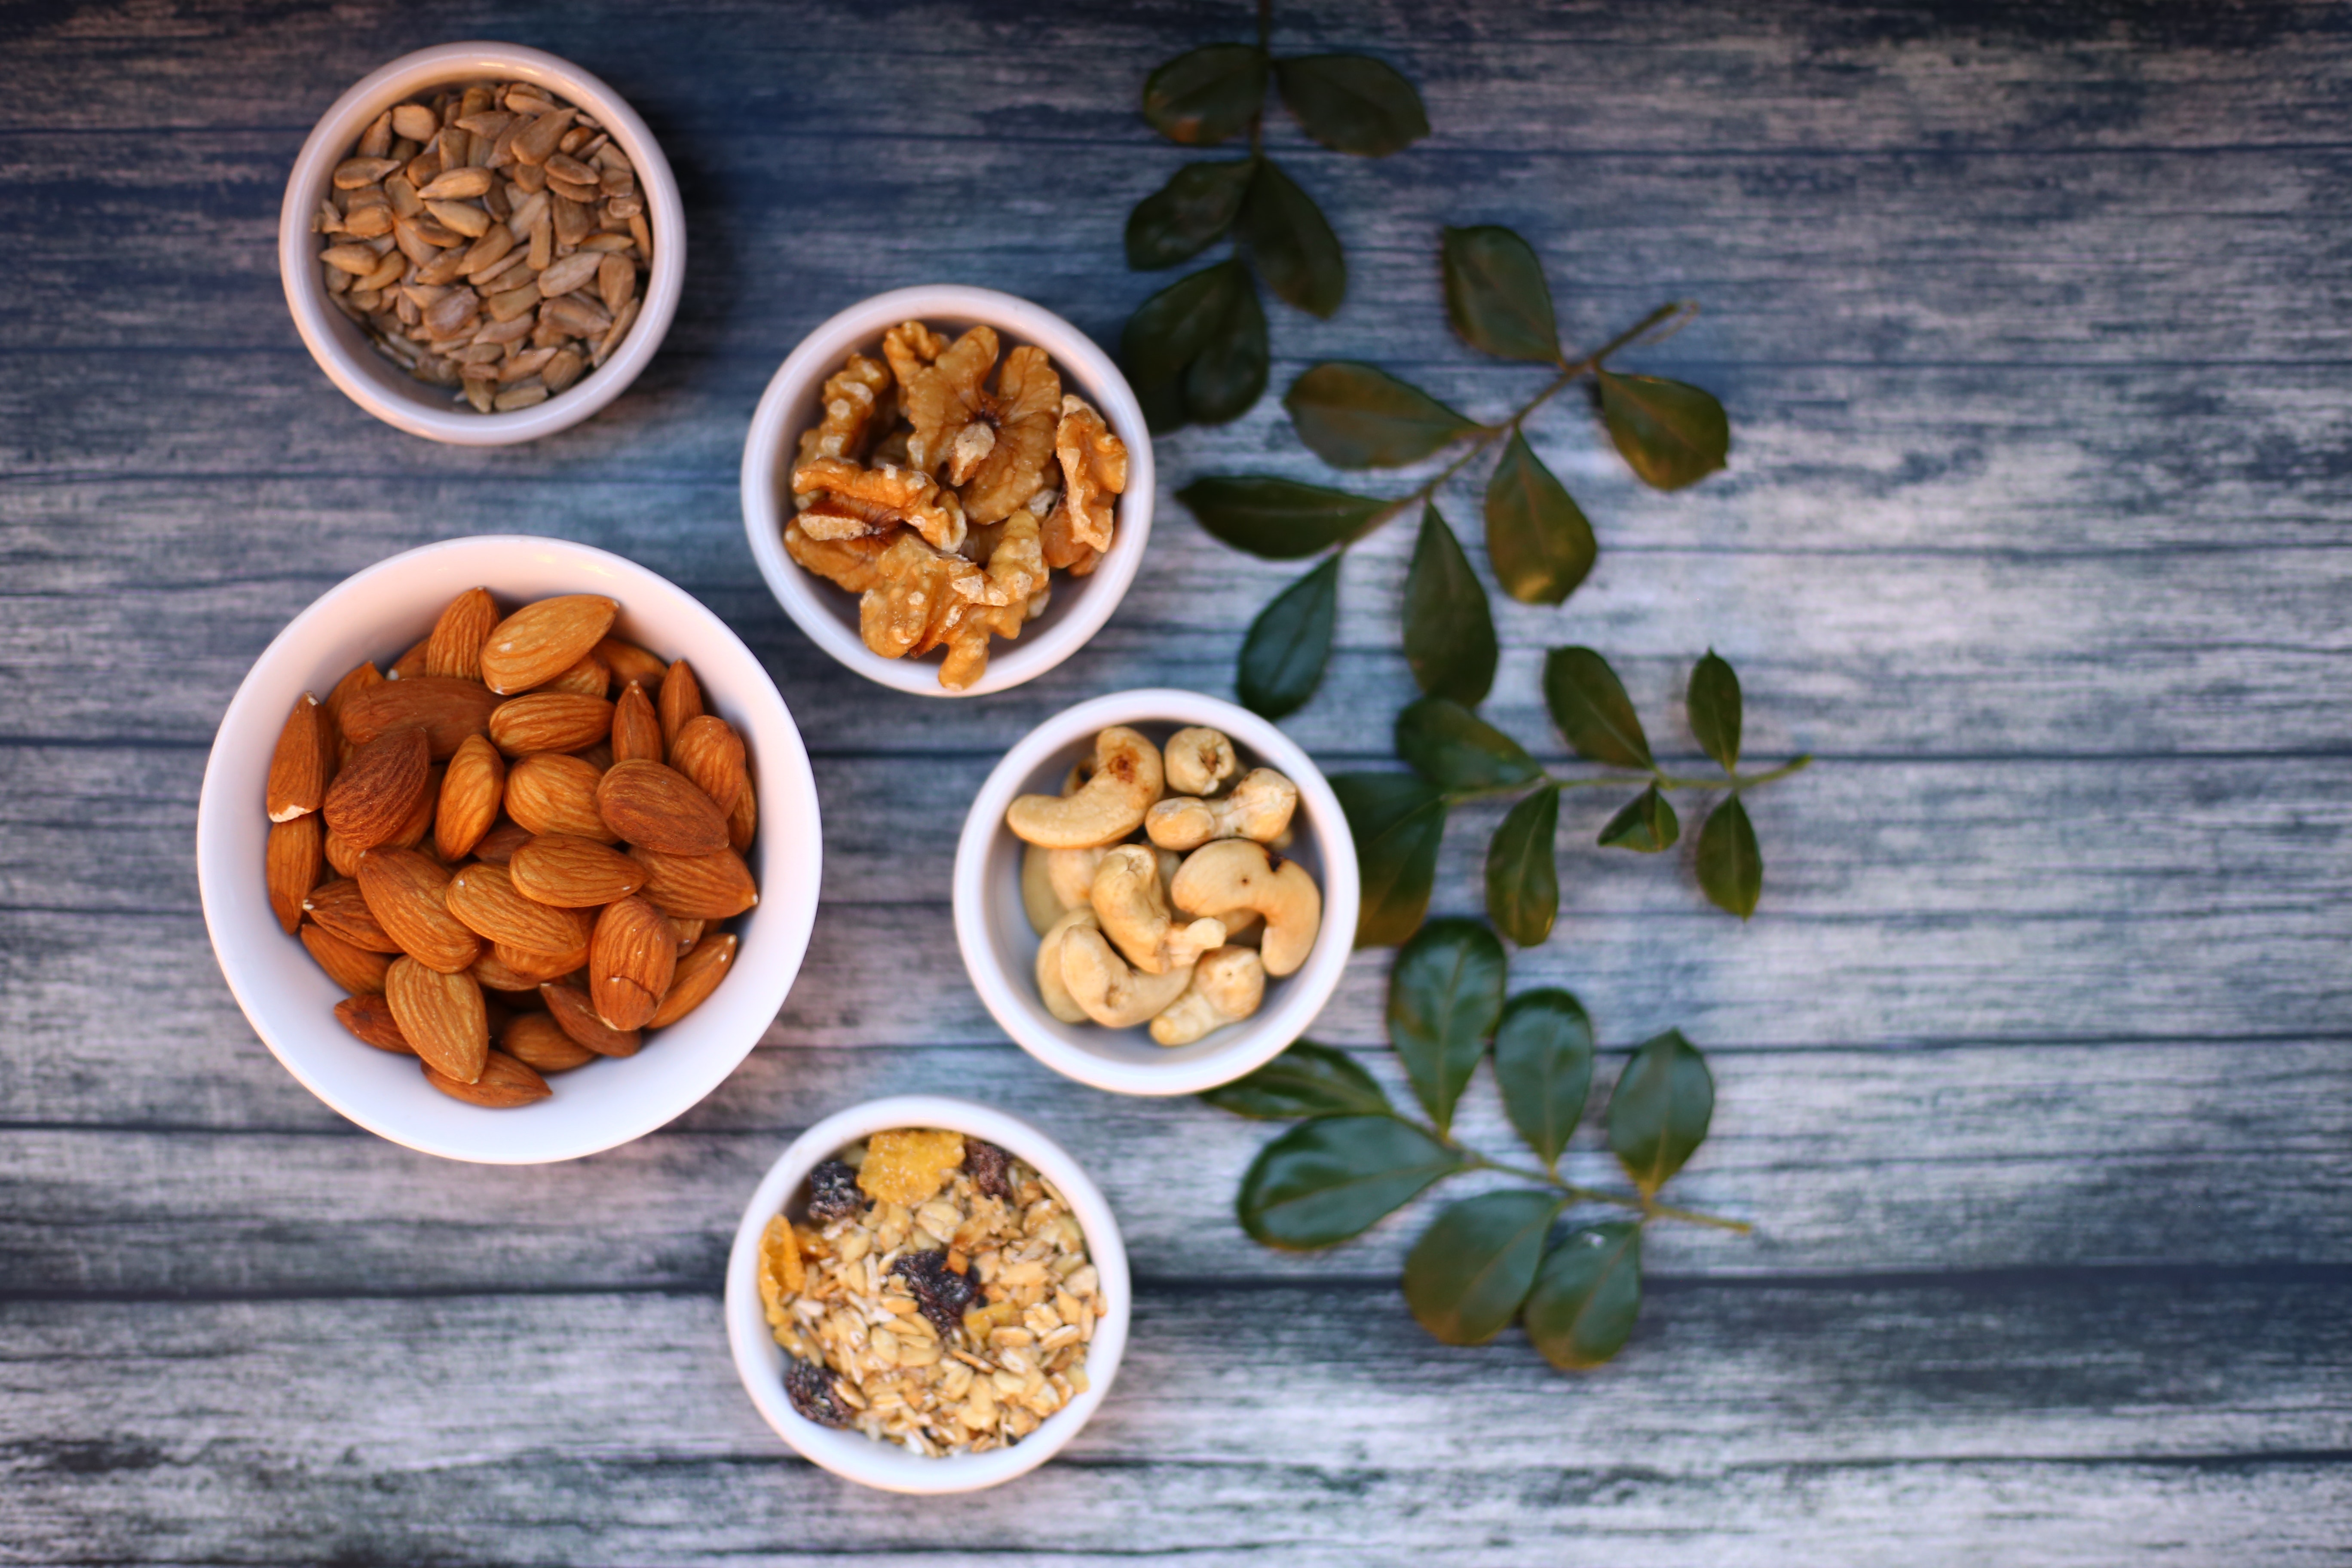 Eat these dry fruits daily to take care of eye health